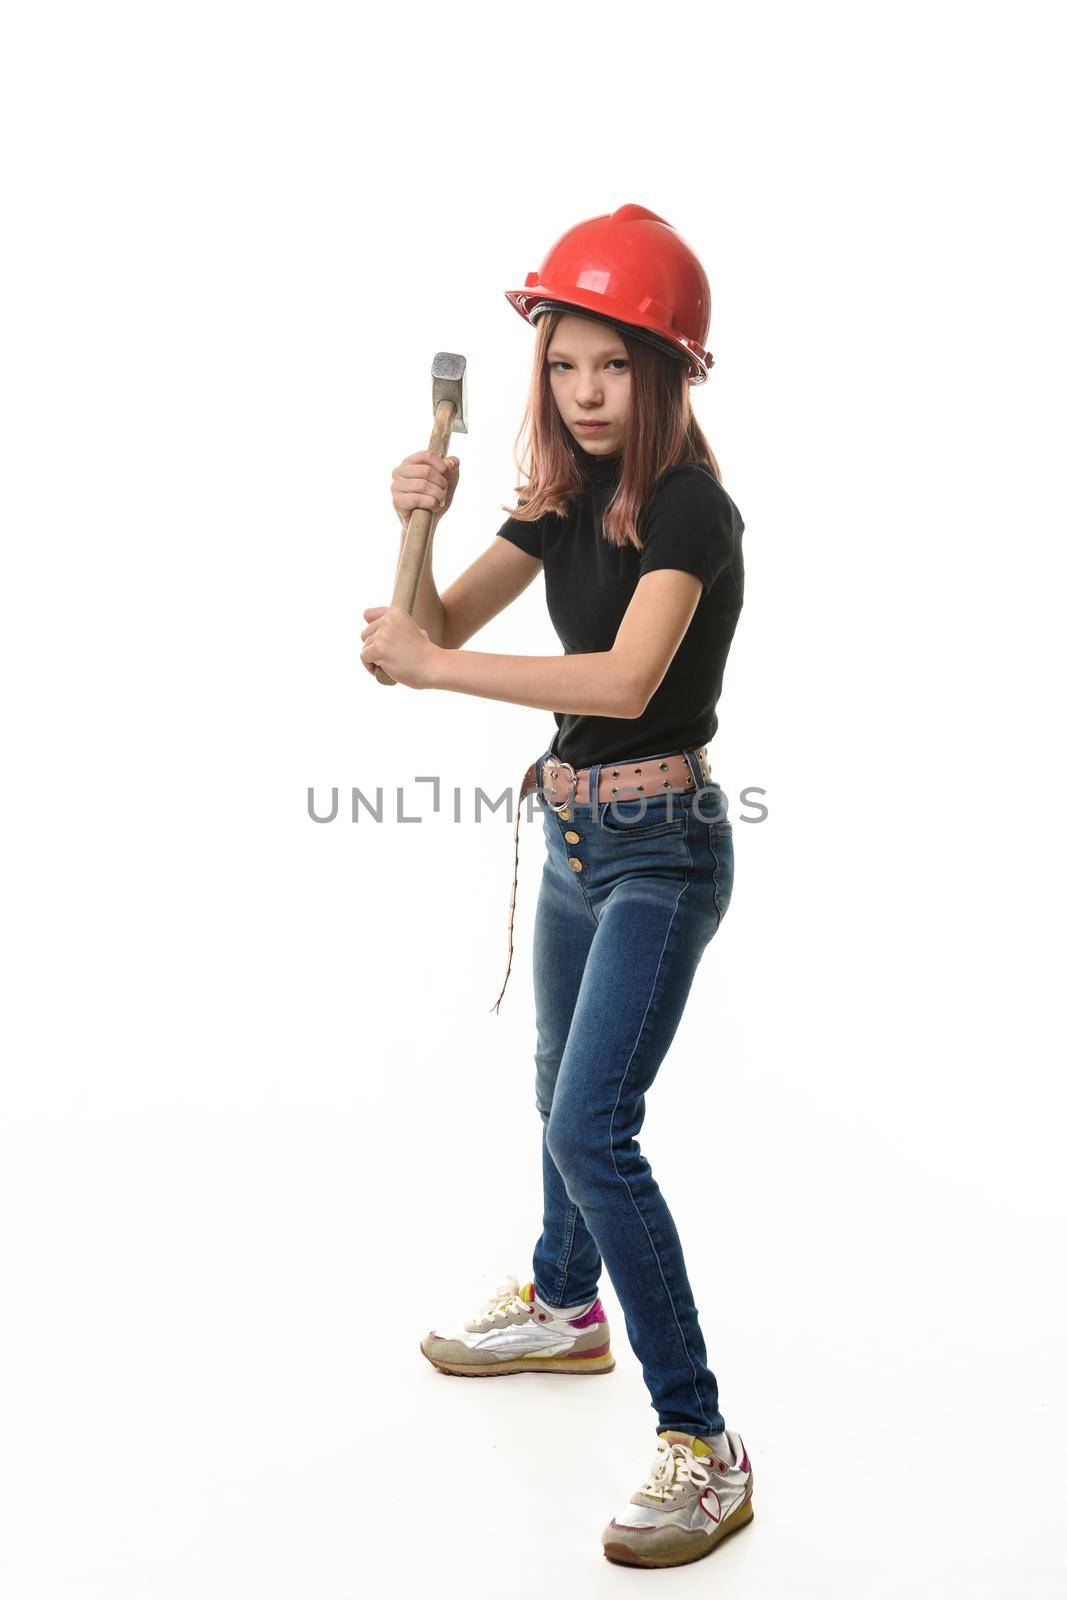 A girl in a hard hat is preparing to hit with a hammer, isolated on a white background by Madhourse